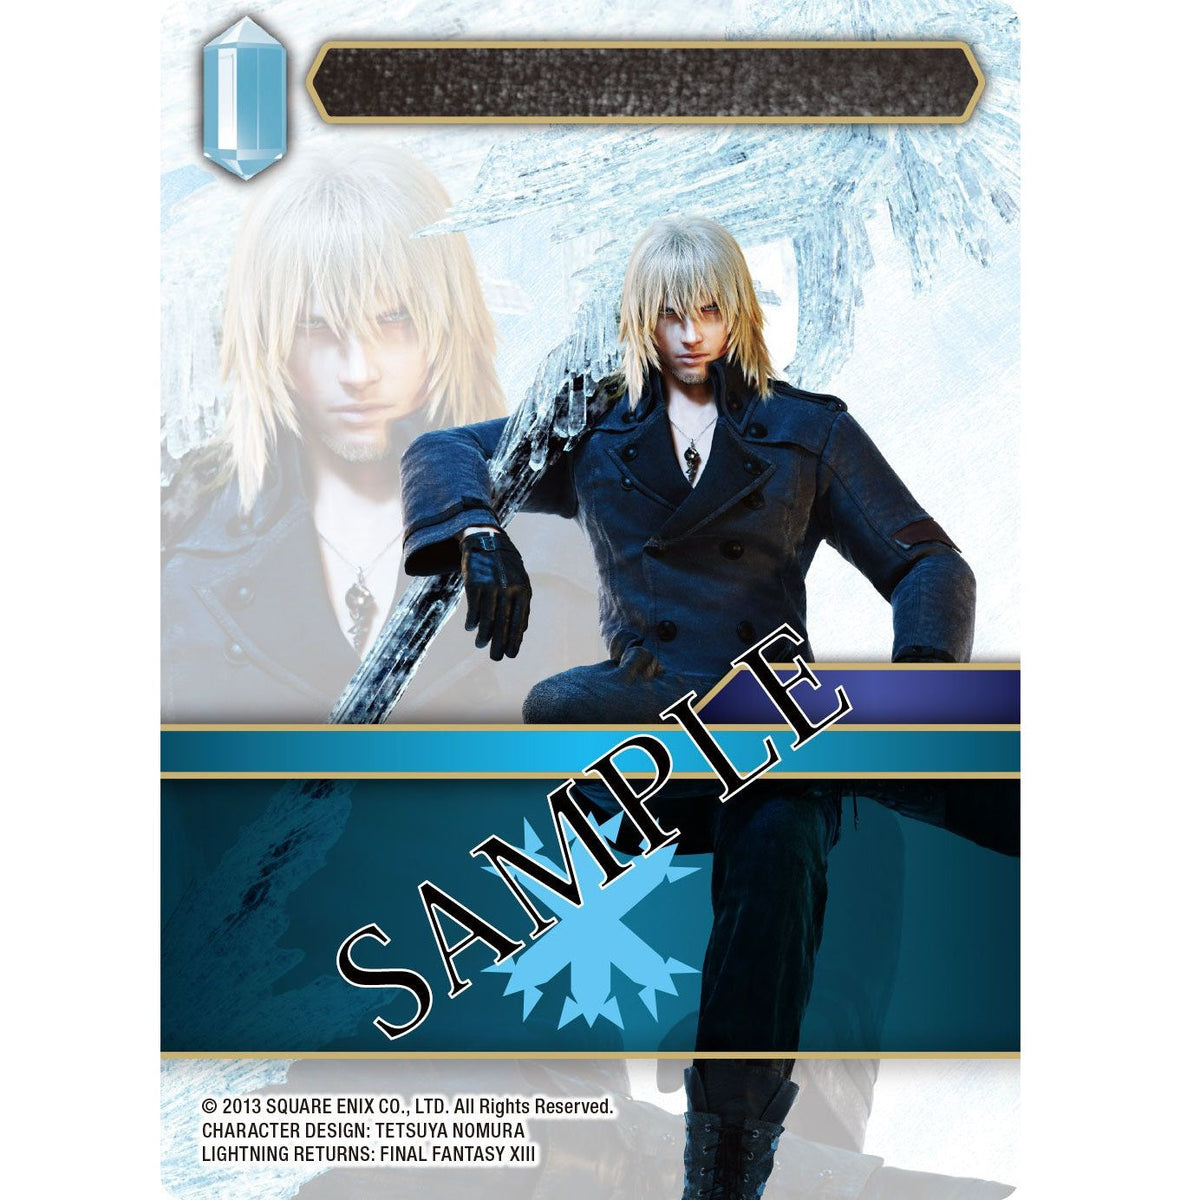 Final Fantasy TCG: Custom Starter Set Final Fantasy XIII-Square Enix-Ace Cards &amp; Collectibles